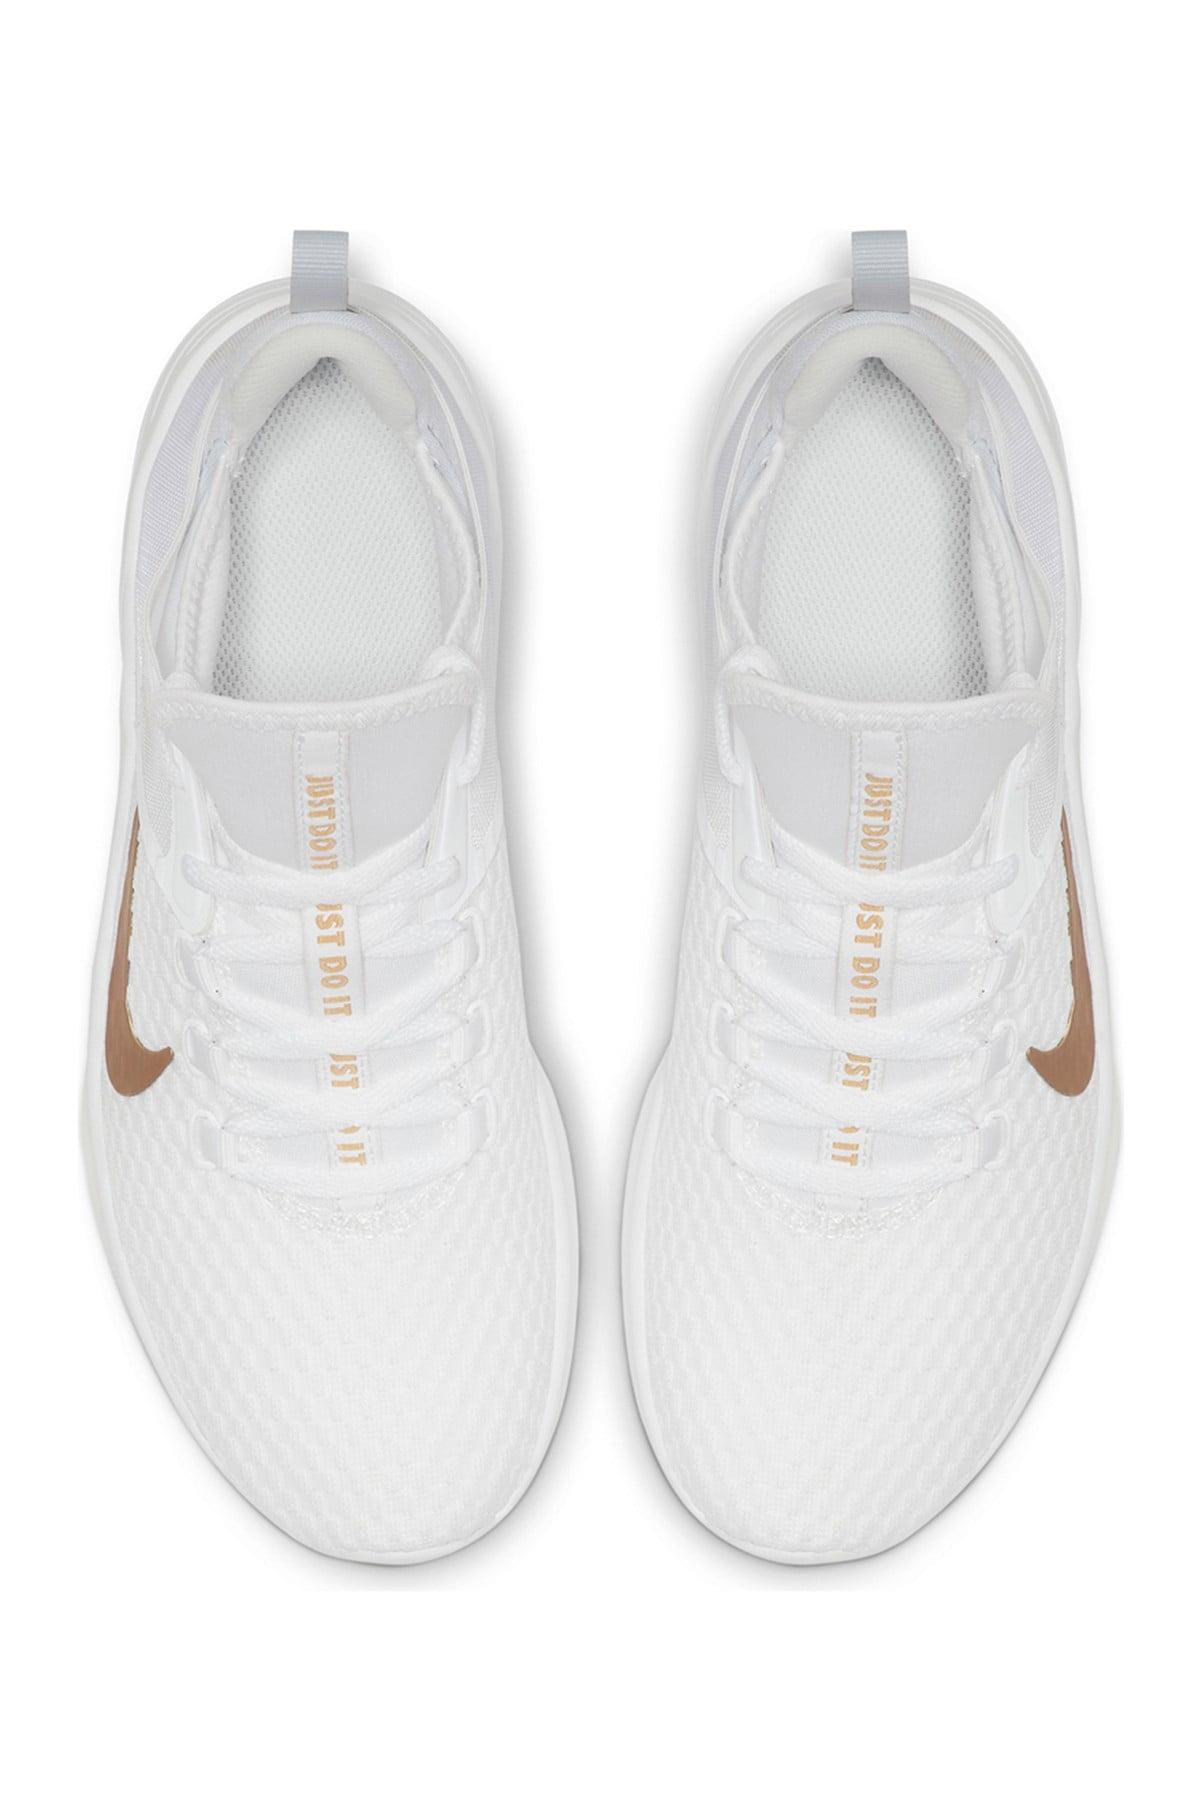 nike air bella white and gold